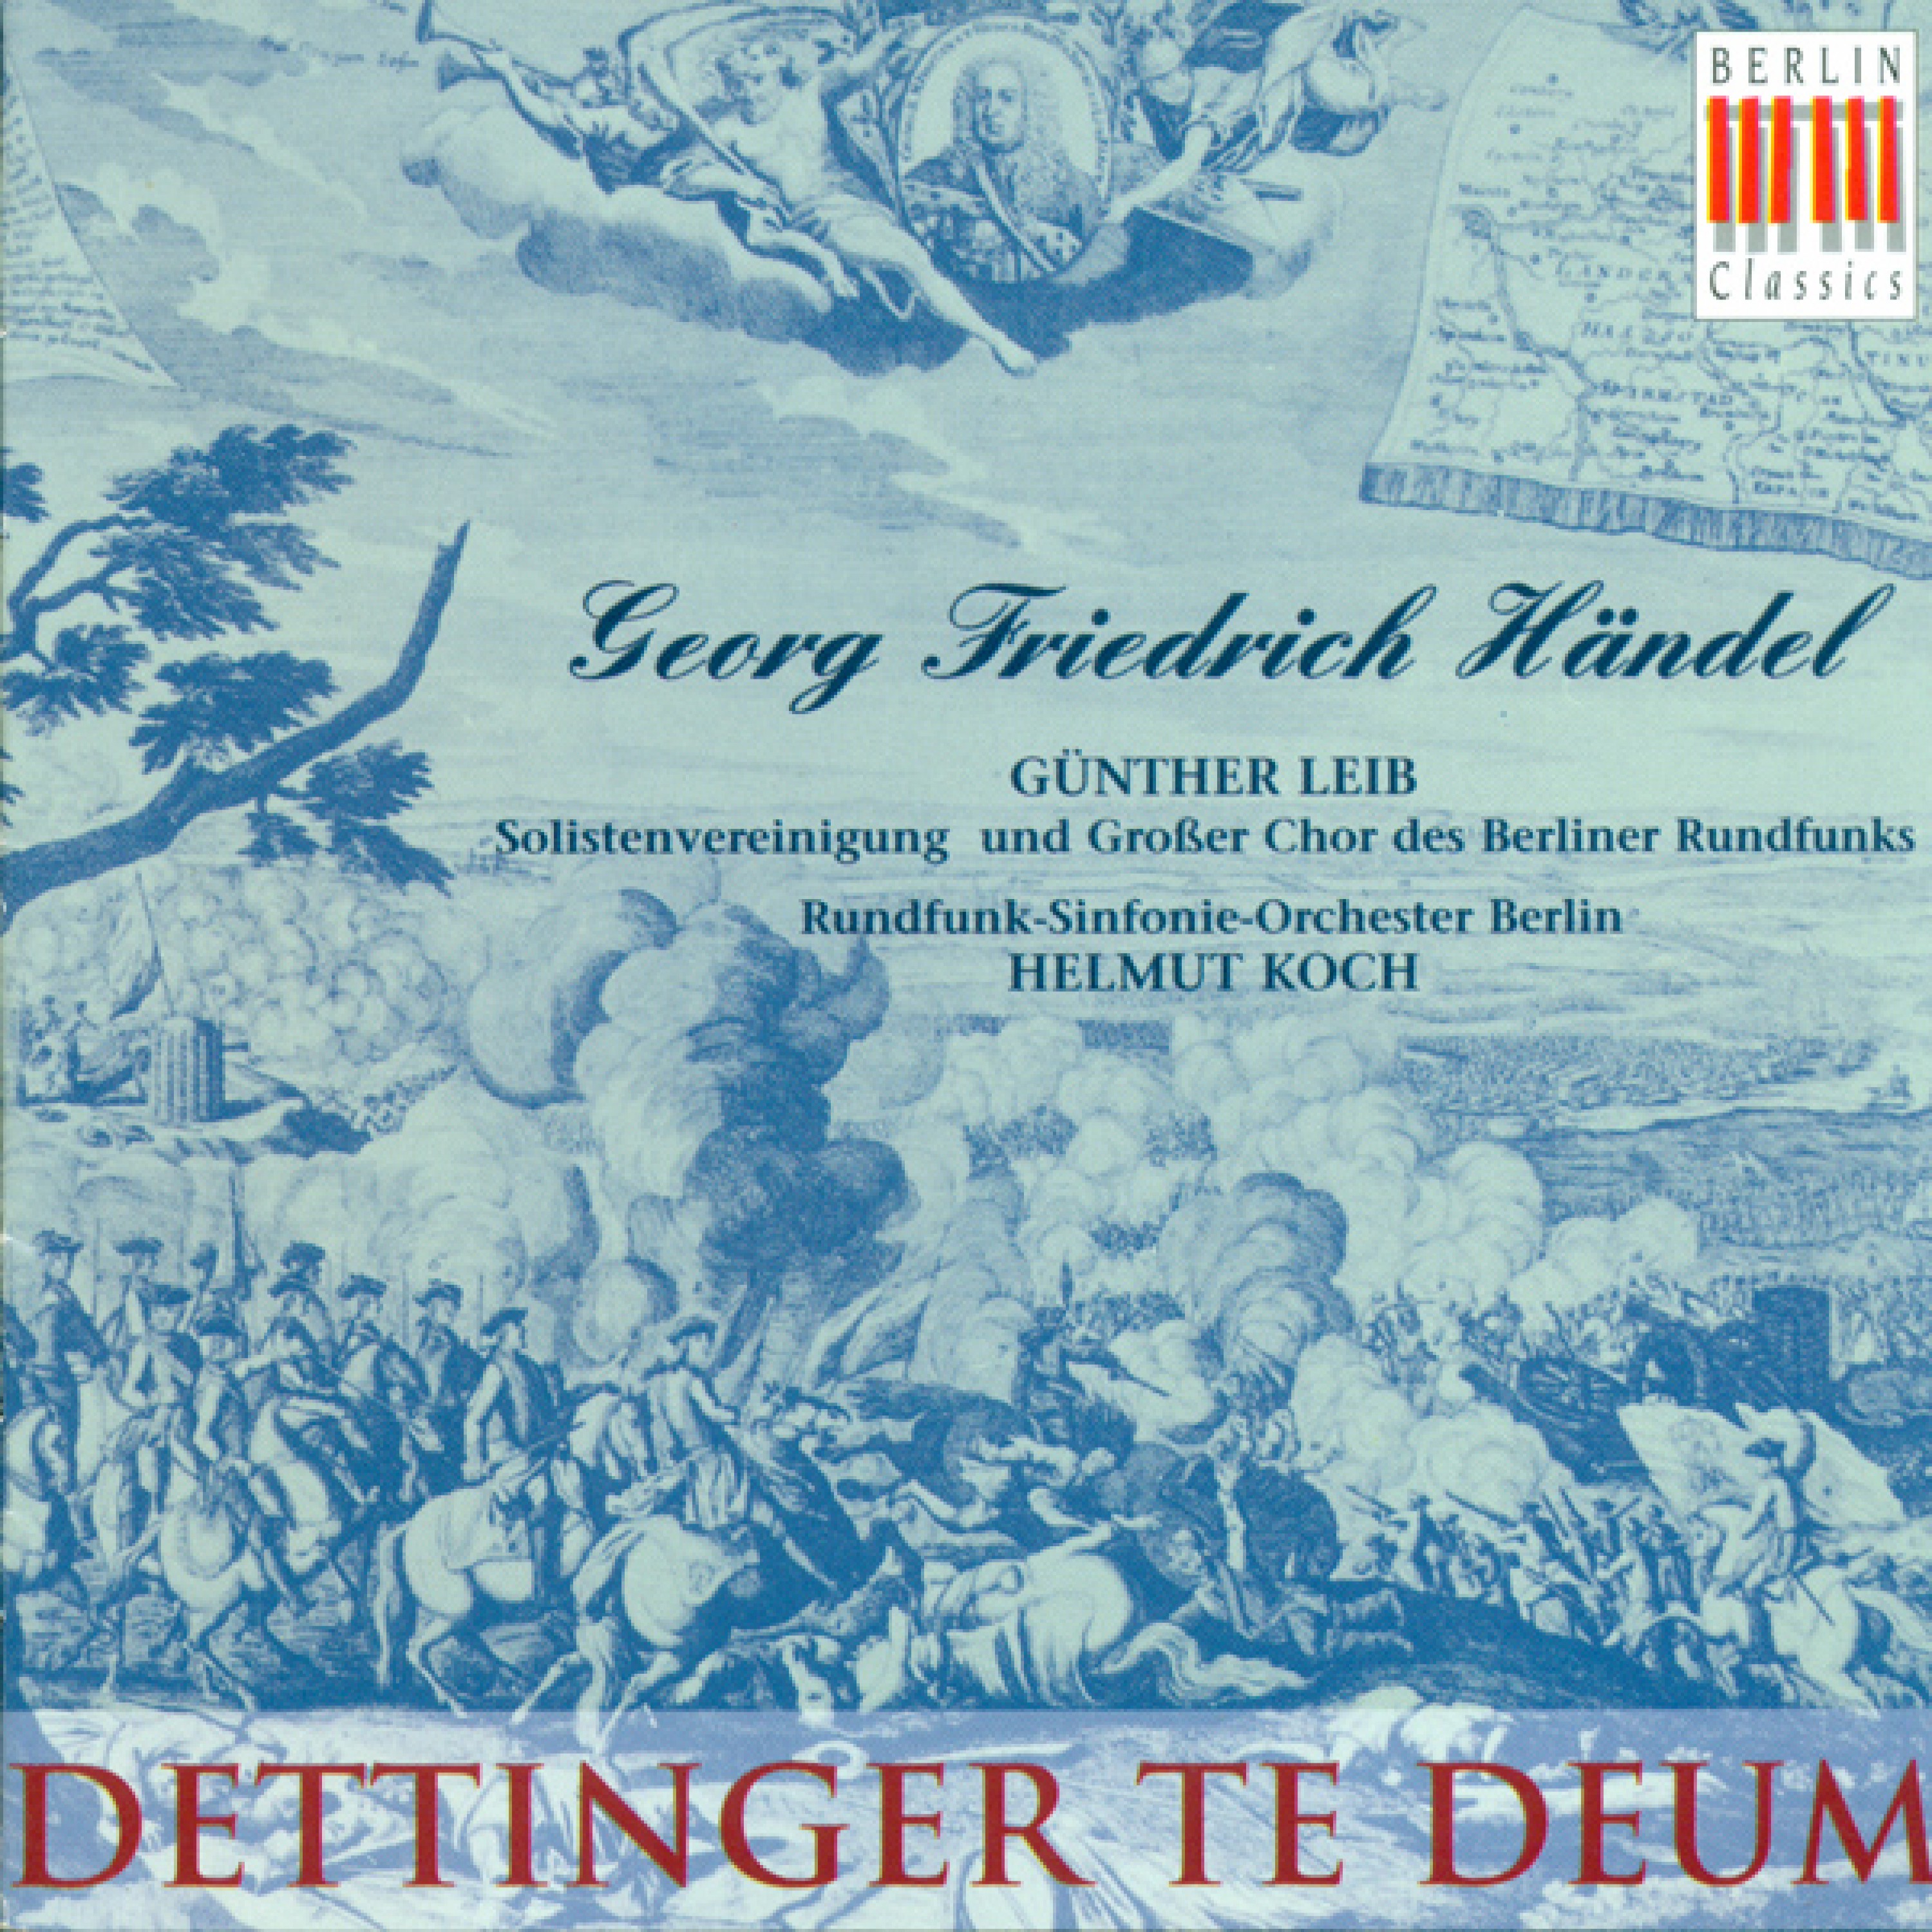 Te Deum in D major, HWV 283, "Dettingen": When Thou tookest upon Thee to deliver Man